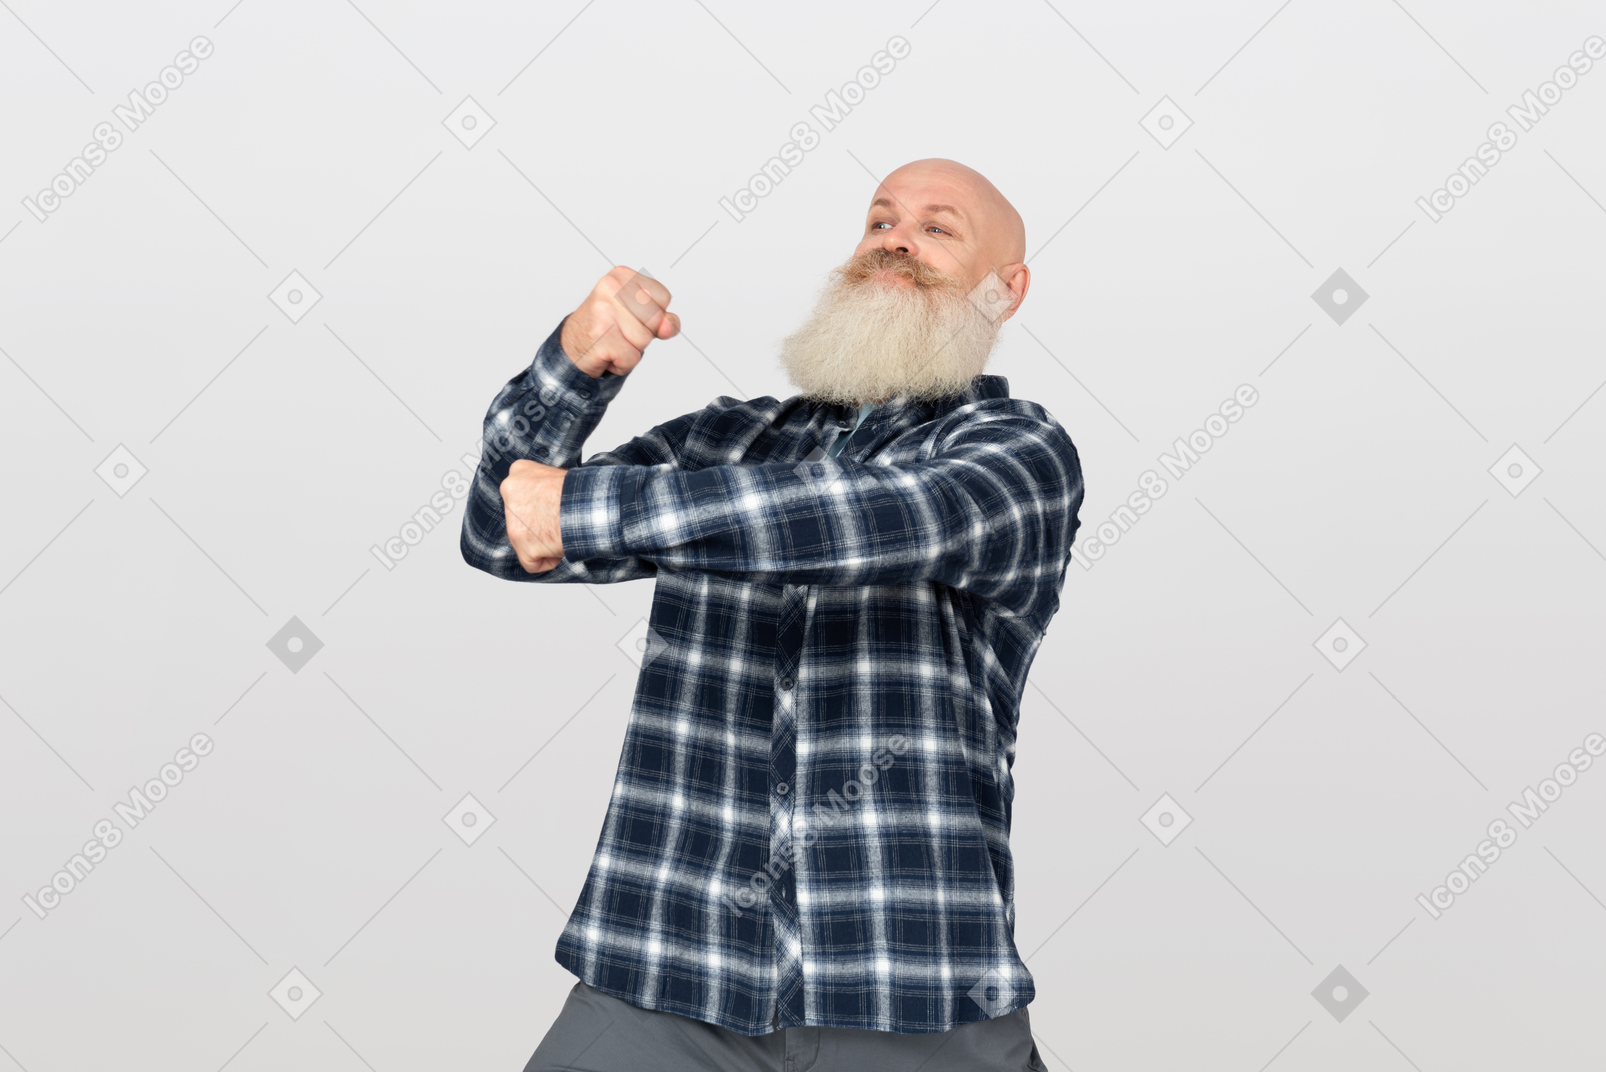 Mature bearded man pretending to carry something